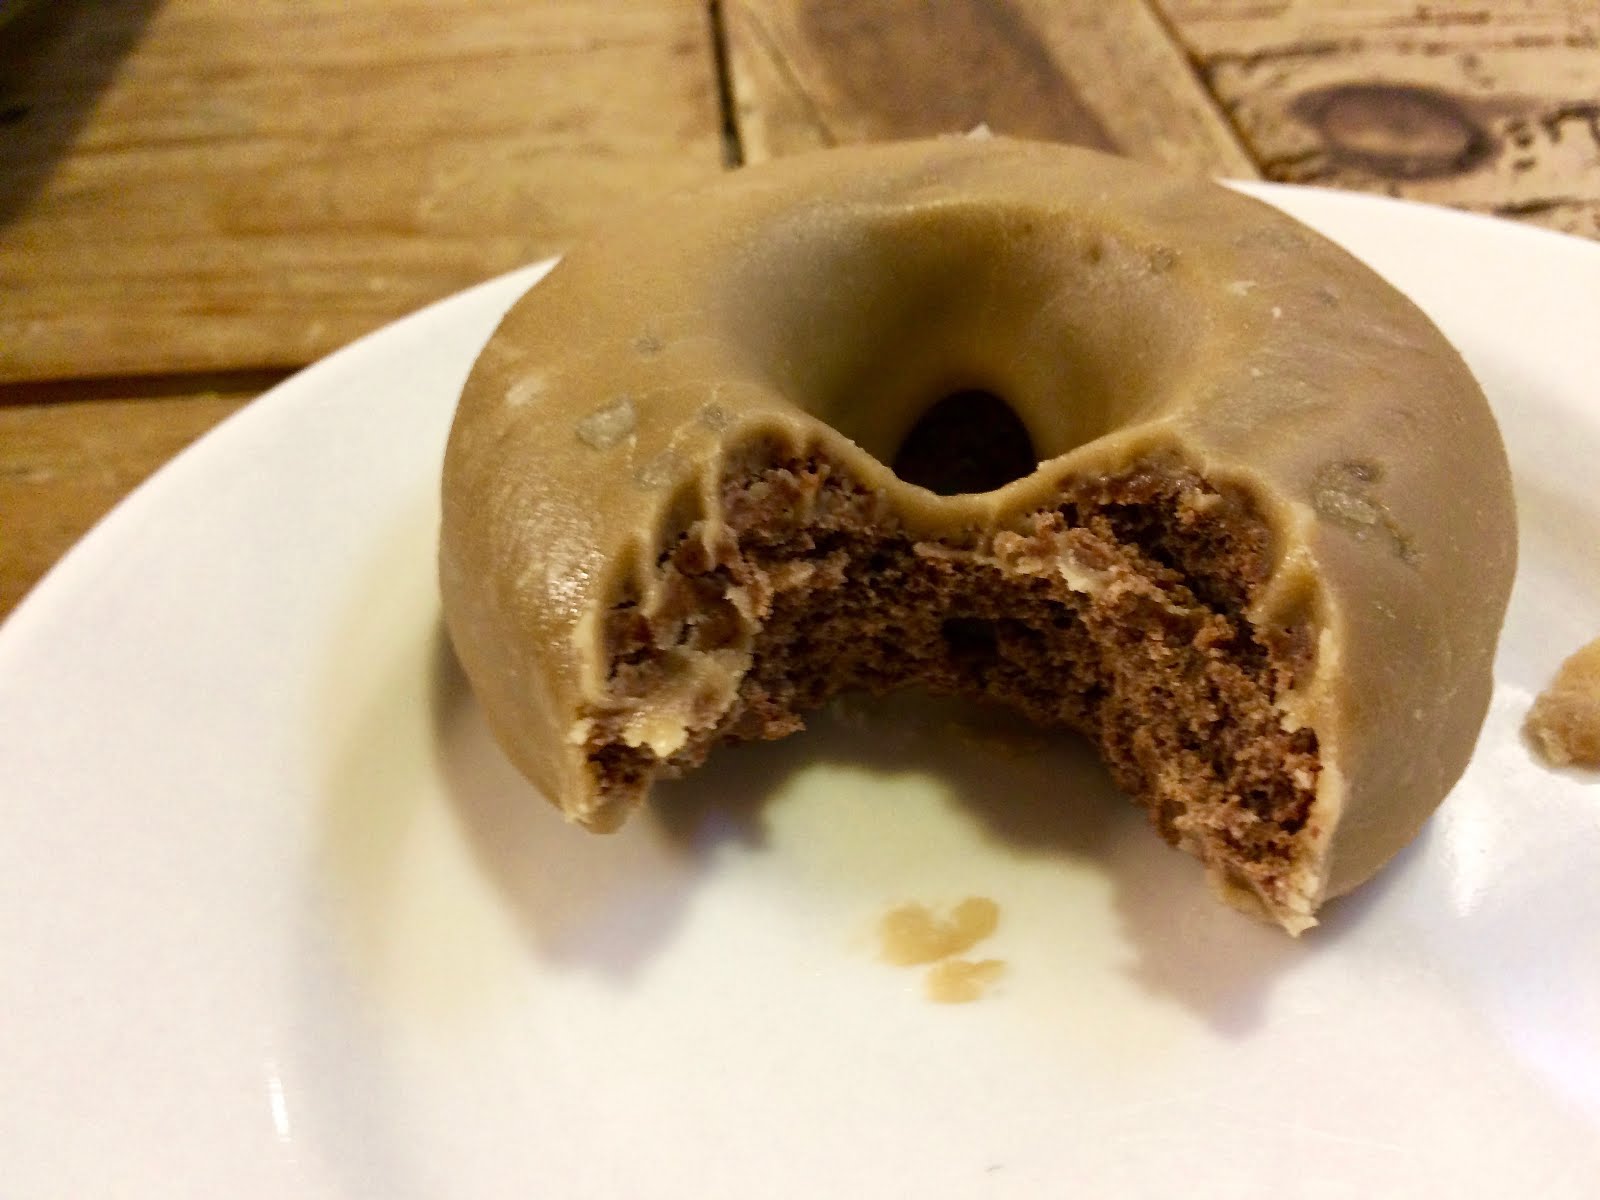 Gluten Free Caramel, Chocolate and some other ingredient Donut from "The Loft" on Washington.